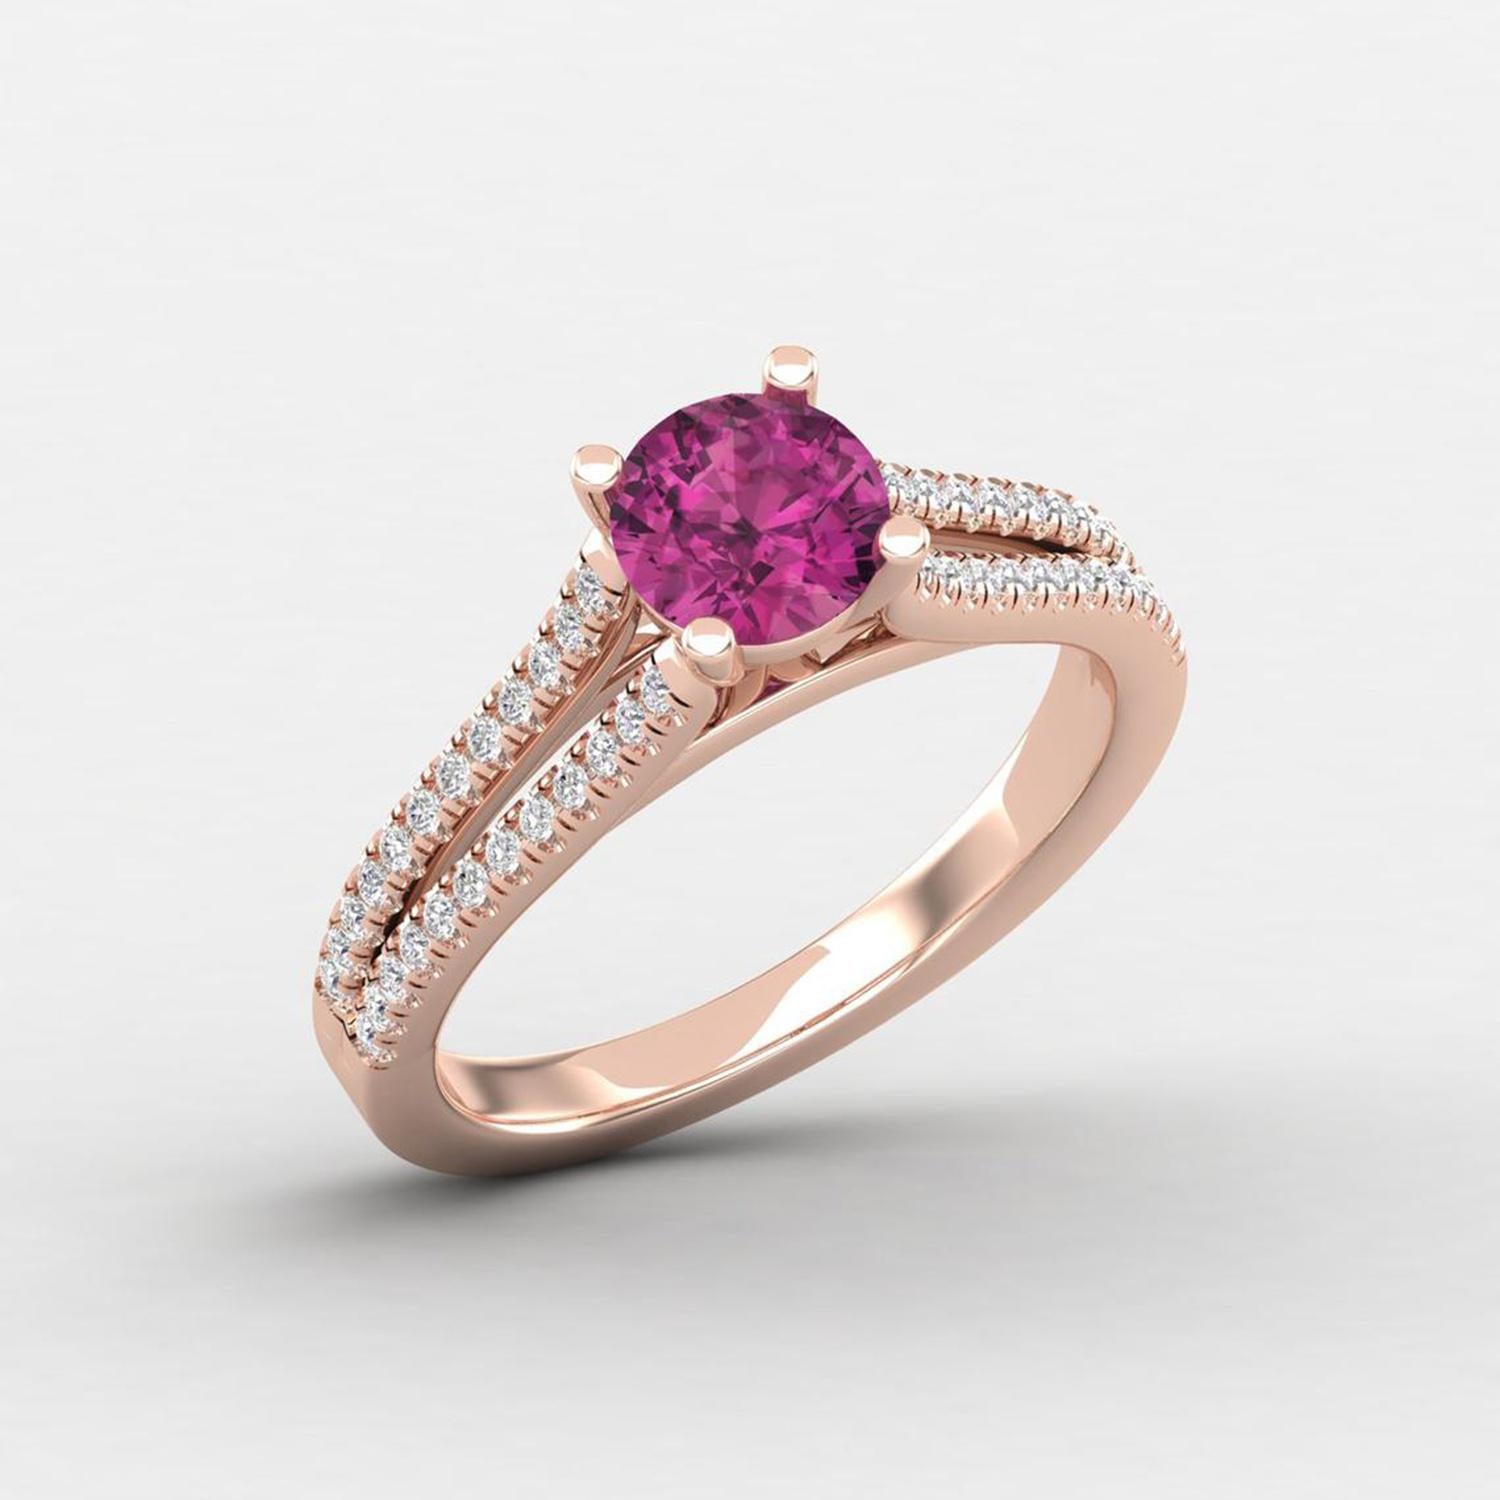 Round Cut 14 K Gold Rubellite Tourmaline Ring / Diamond Solitaire Ring / Ring for Her For Sale